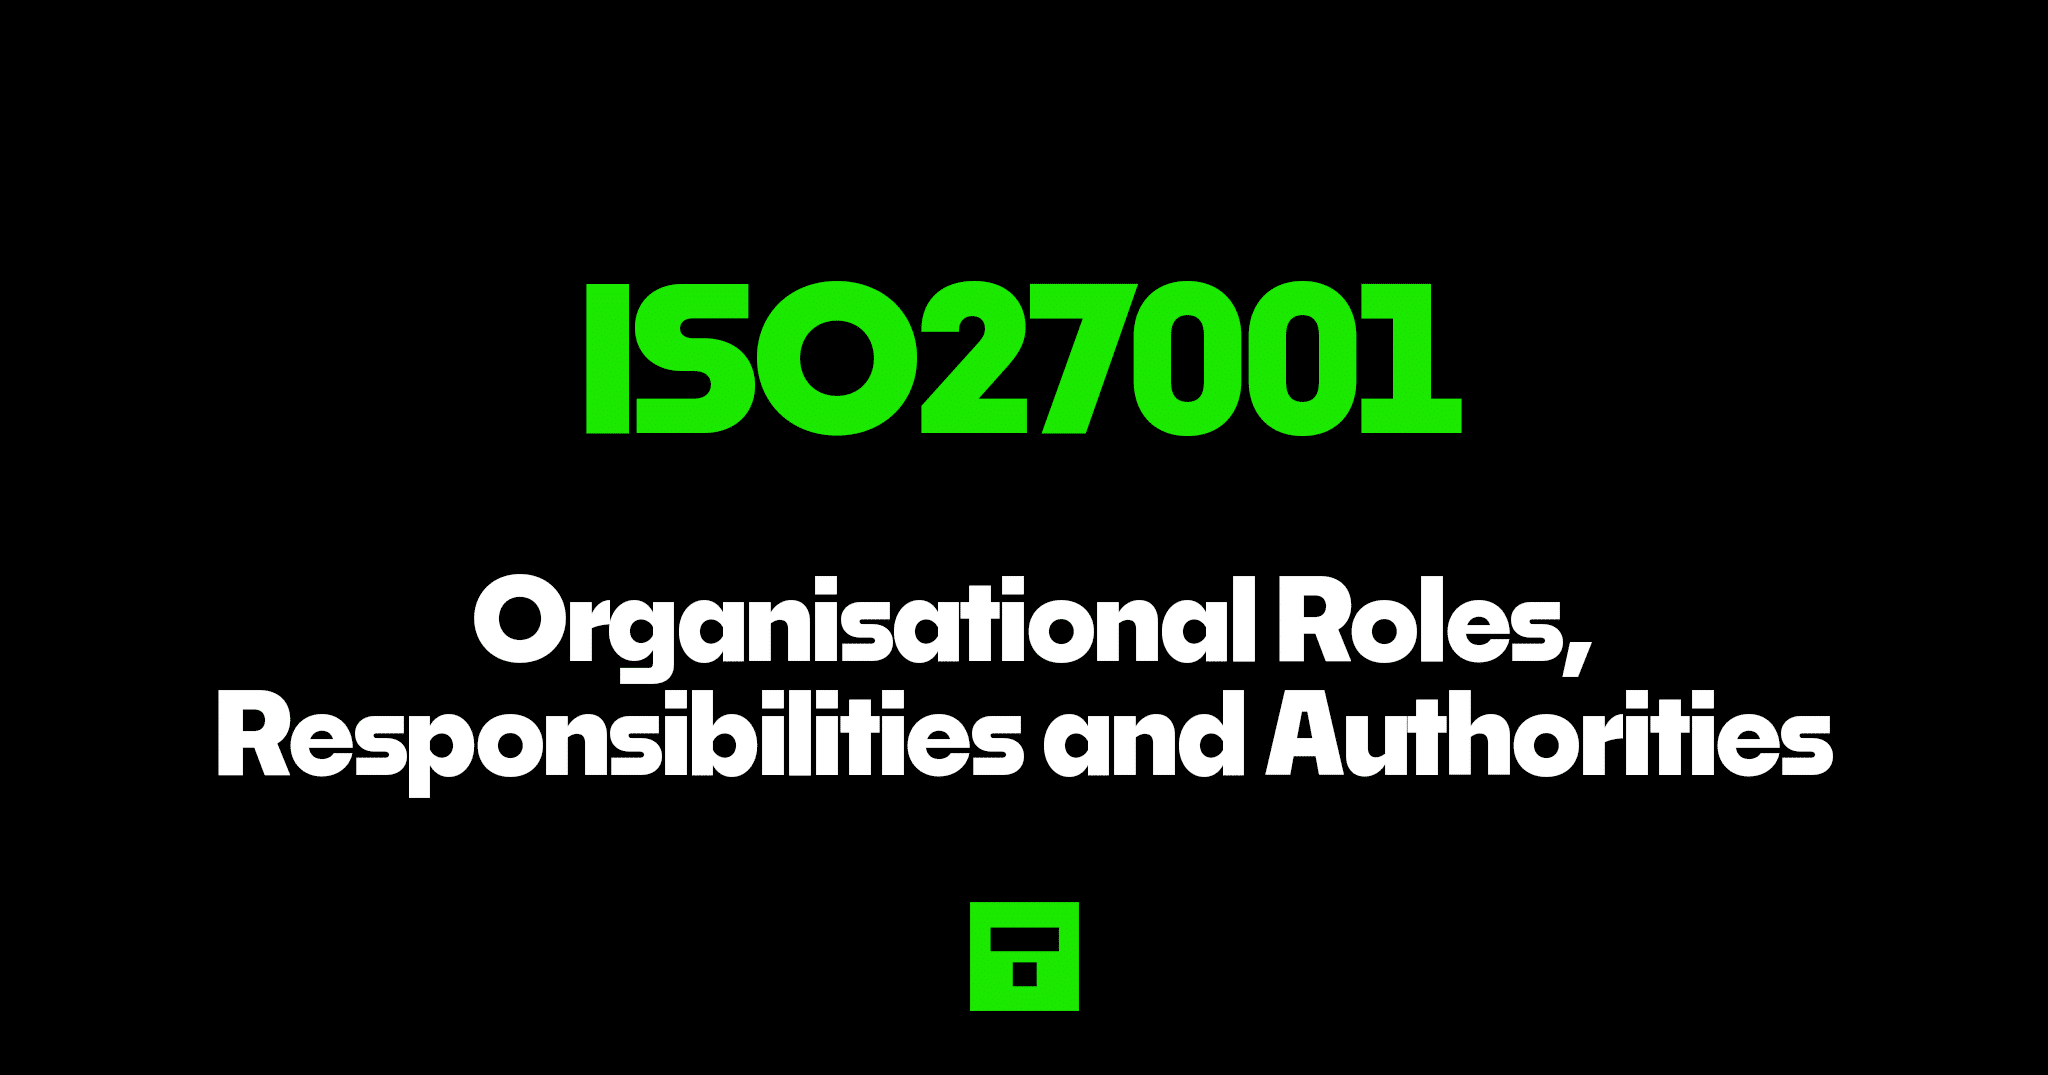 ISO27001 Organisational Roles, Responsibilities and Authorities